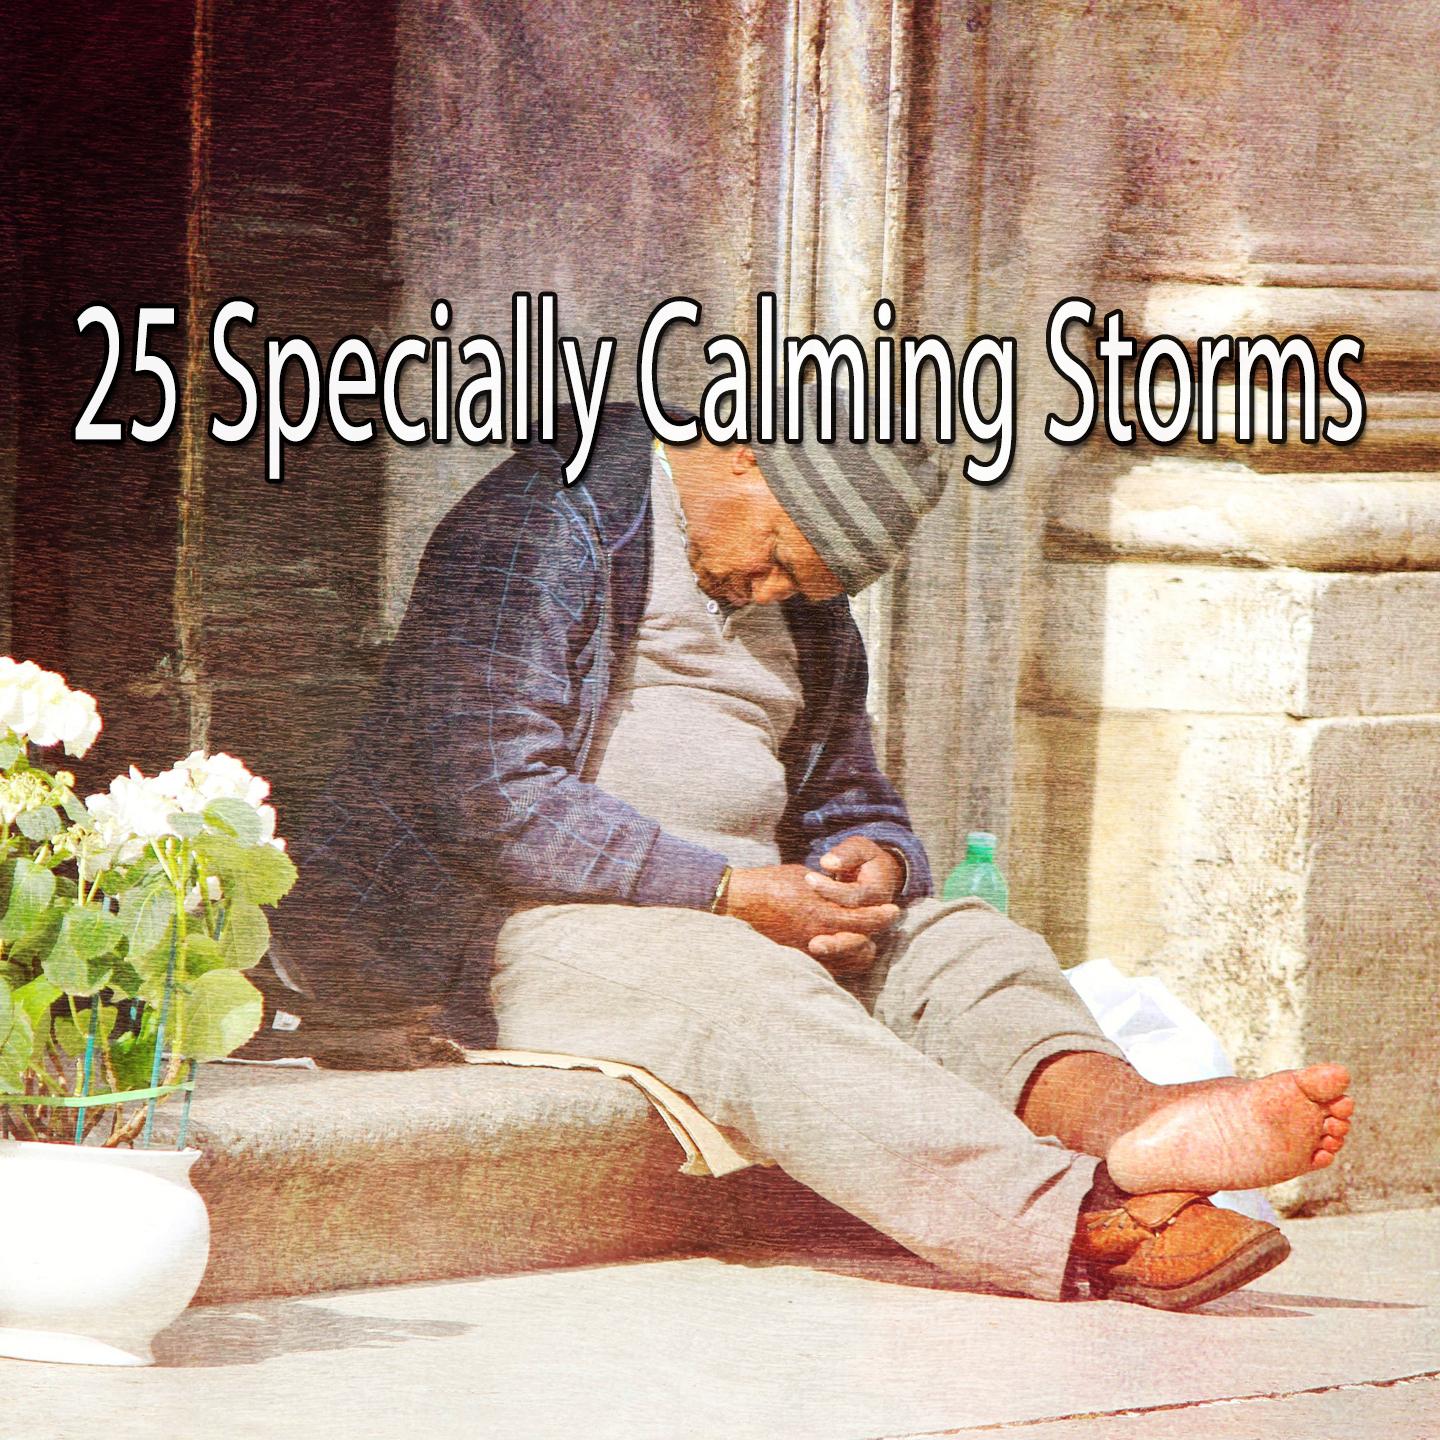 25 Specially Calming Storms